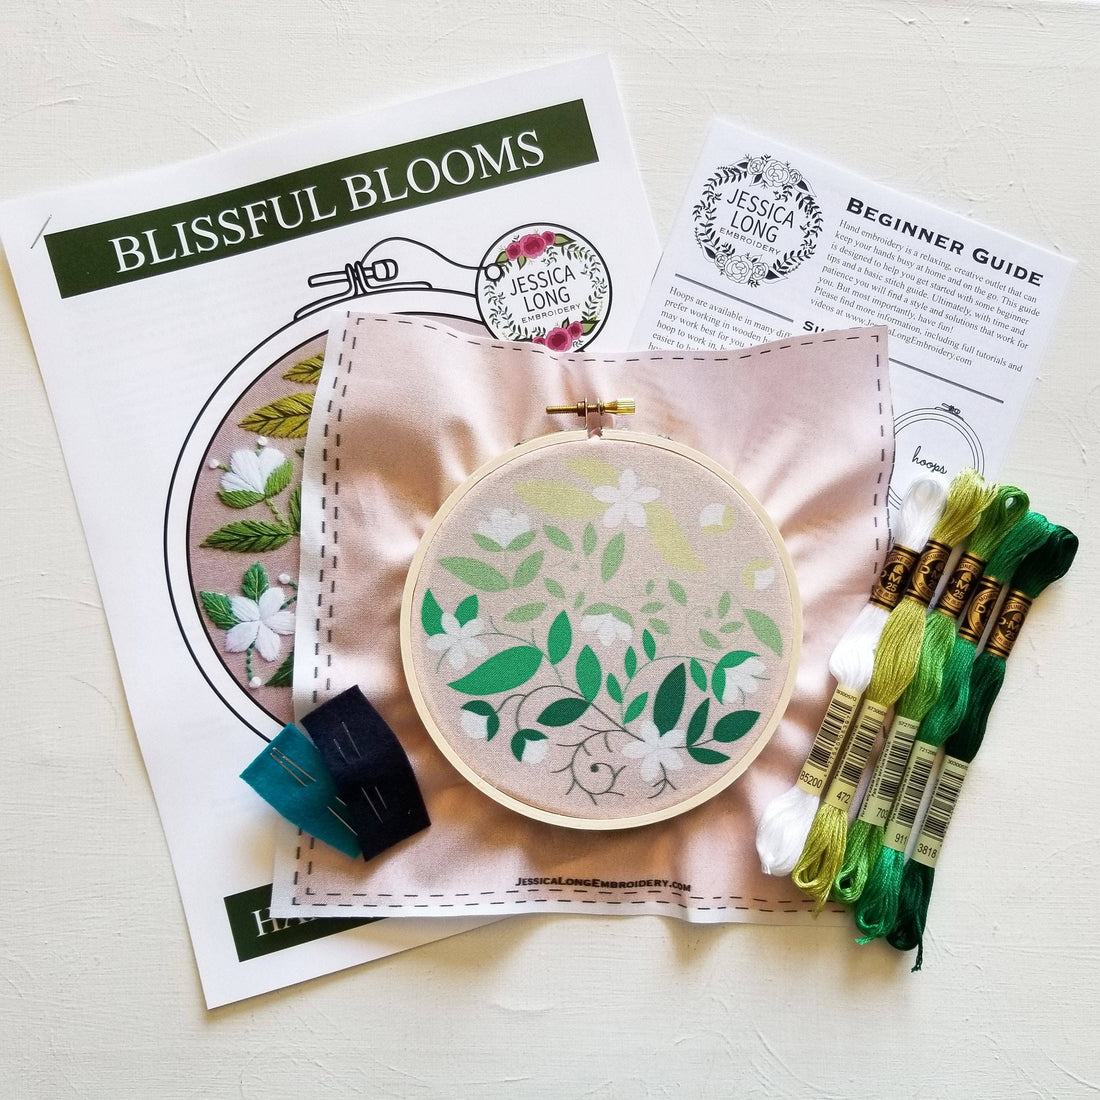 Blissful BloomsEmbroidery Kit - Jessica Long Embroidery